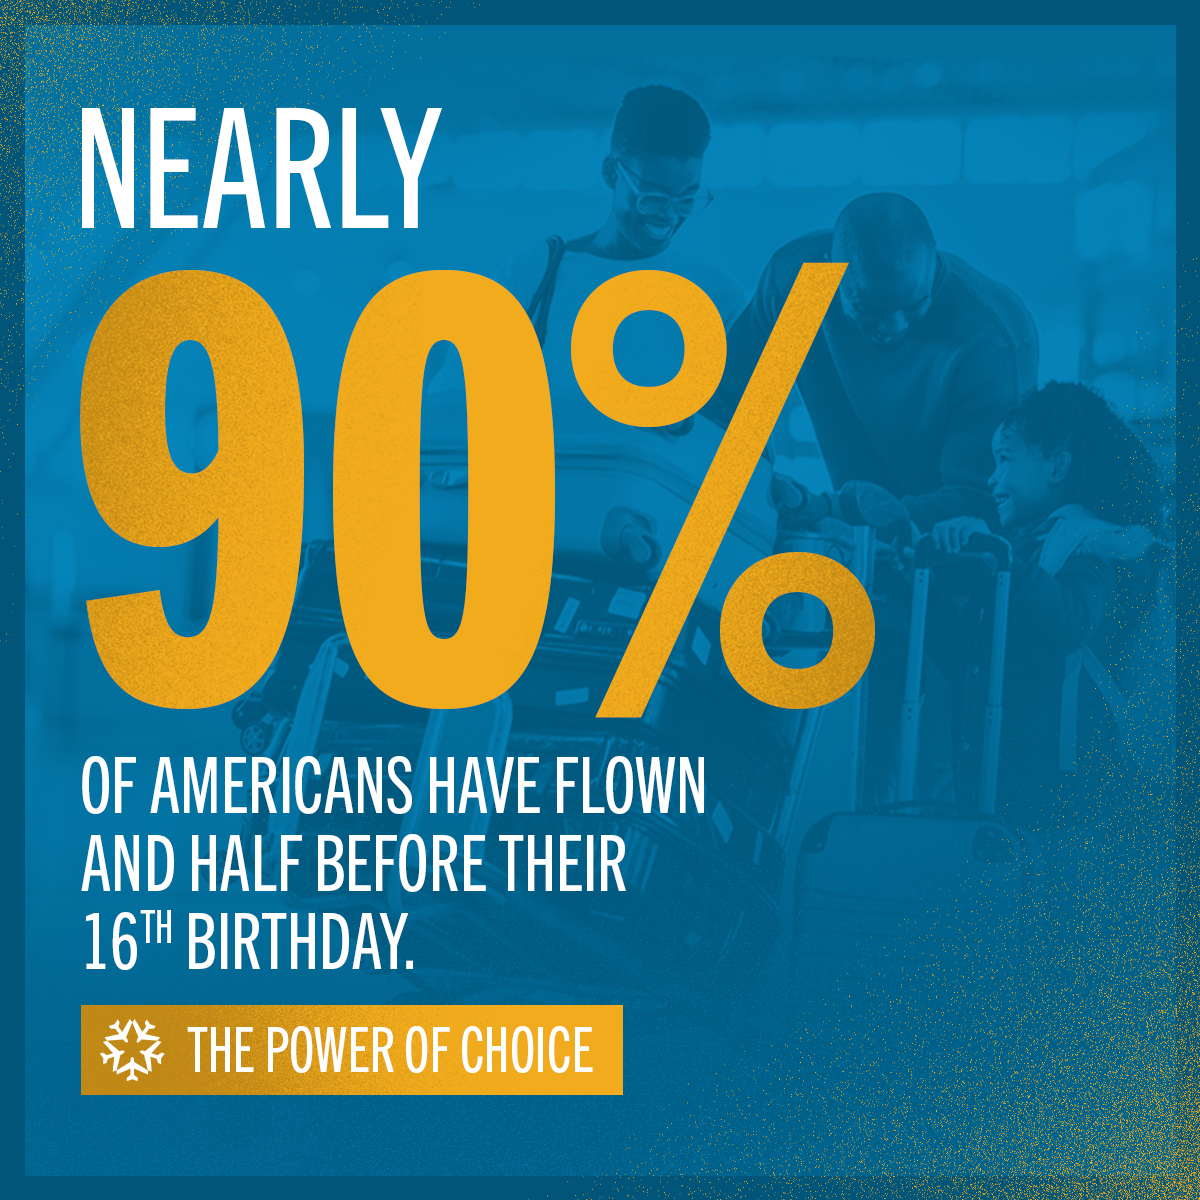 90% of Americans have flown, and half before their 16th birthday. This is all possible because robust competition among airlines has made flying more affordable and accessible, giving consumers the #PowerofChoice: bit.ly/4a722X1